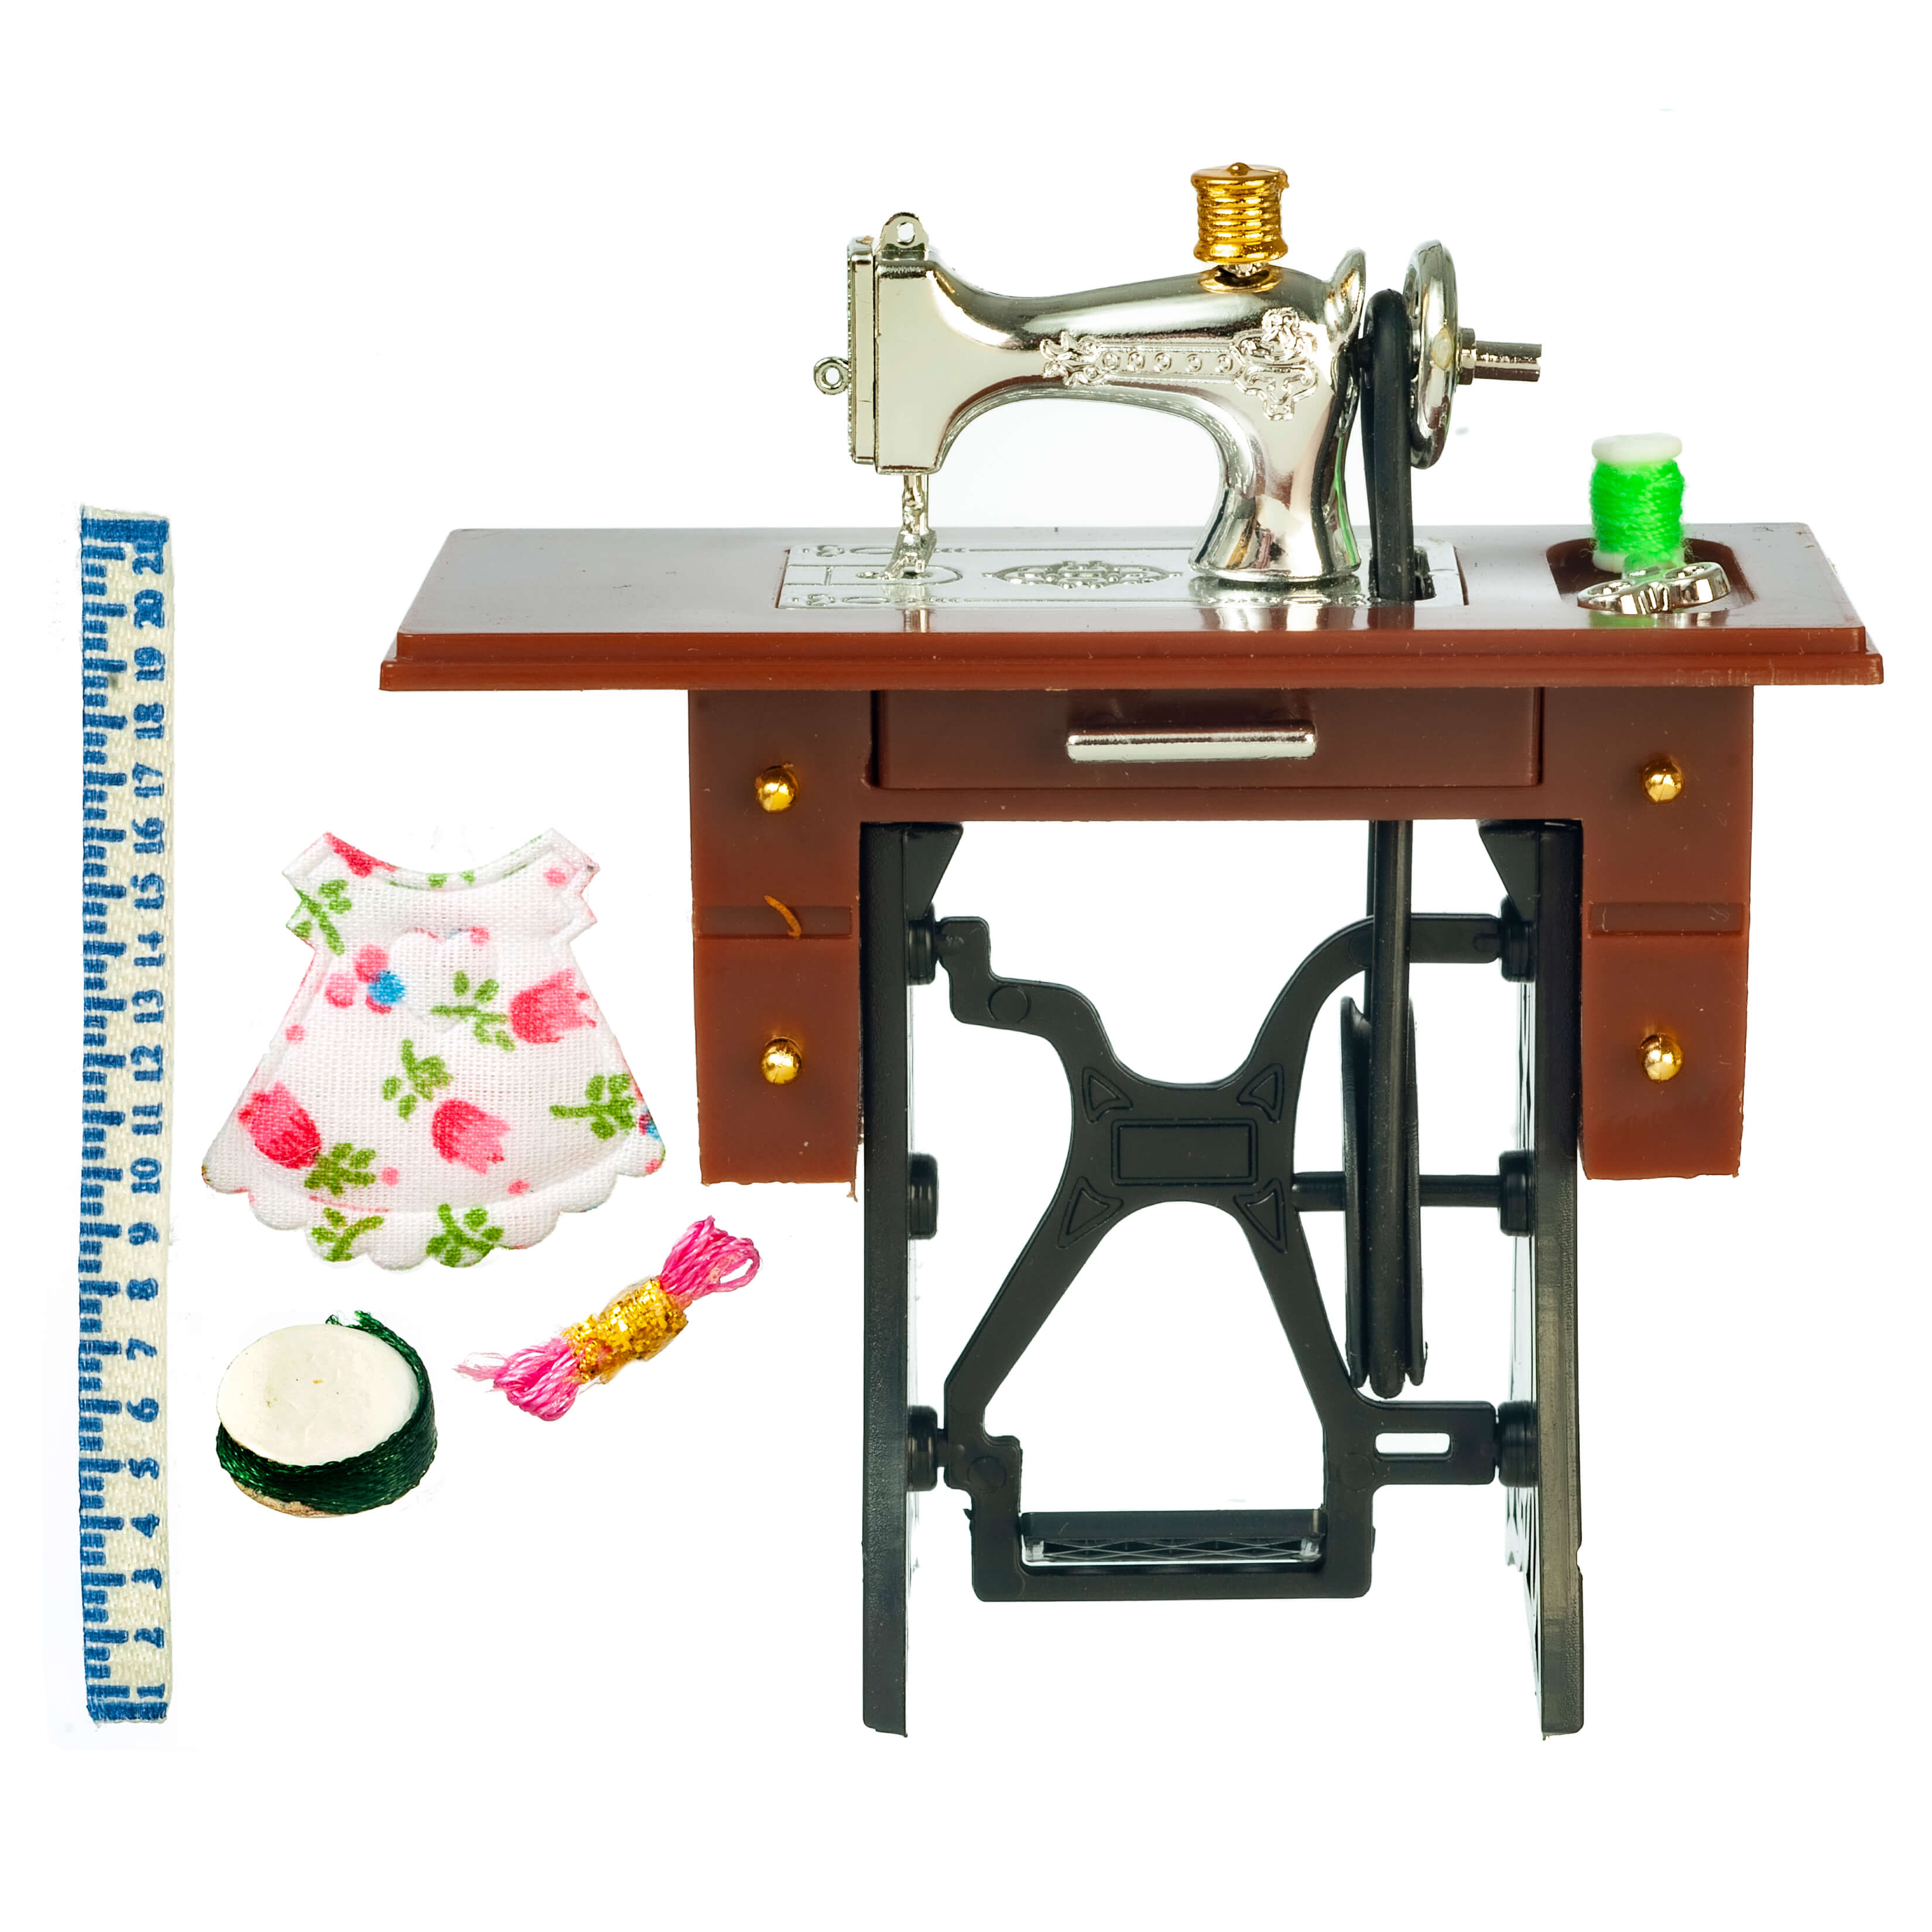 Sewing Machine Cabinet & Accessories Set - Silver